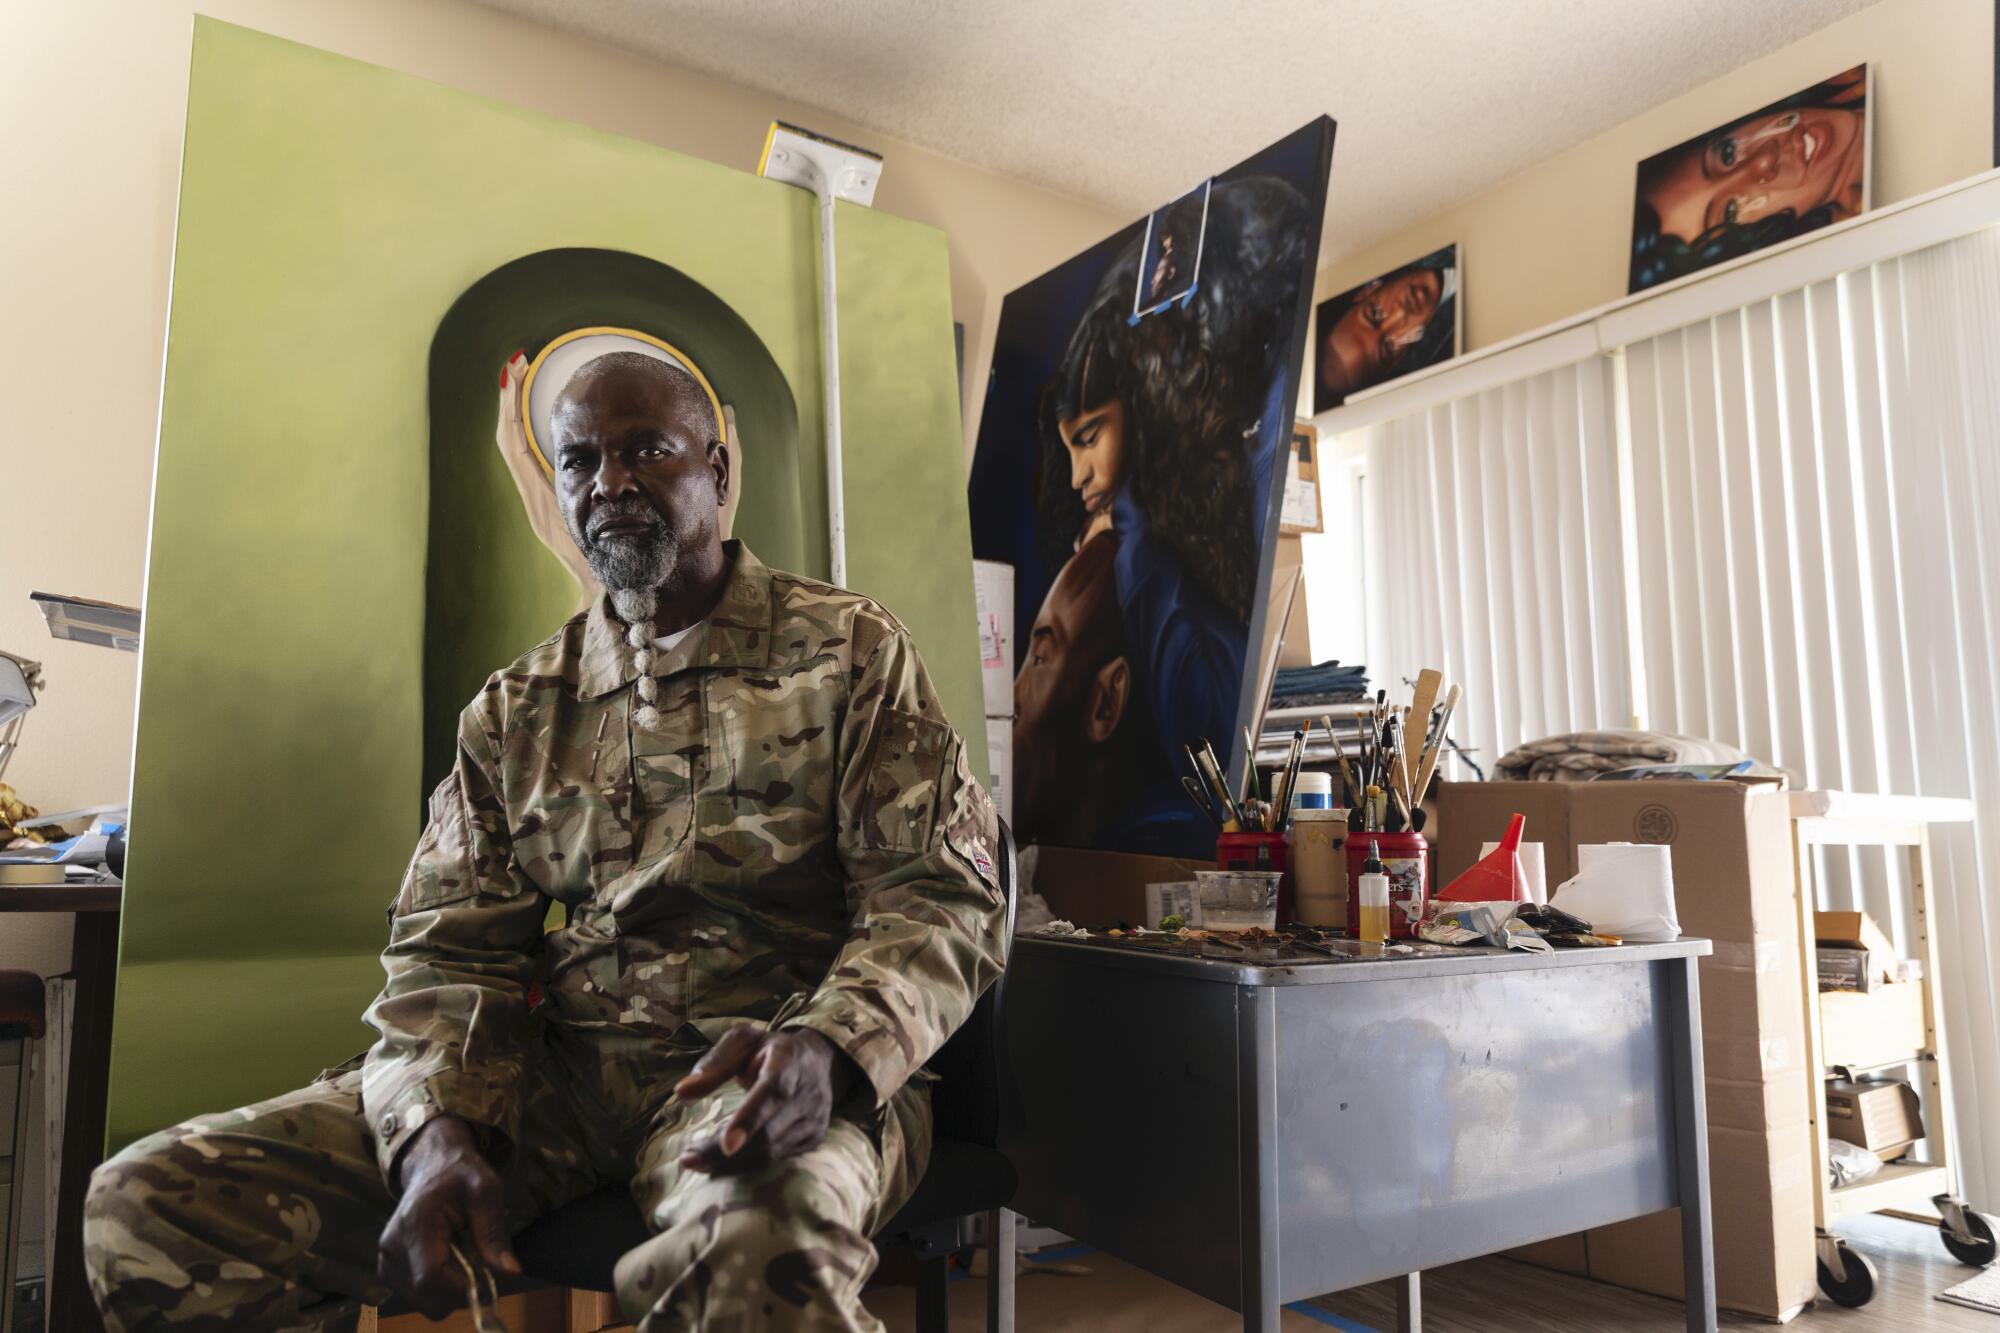 Artist, Fulton Leroy Washington also known as "Mr. Wash" photographed in his home in Compton, CA